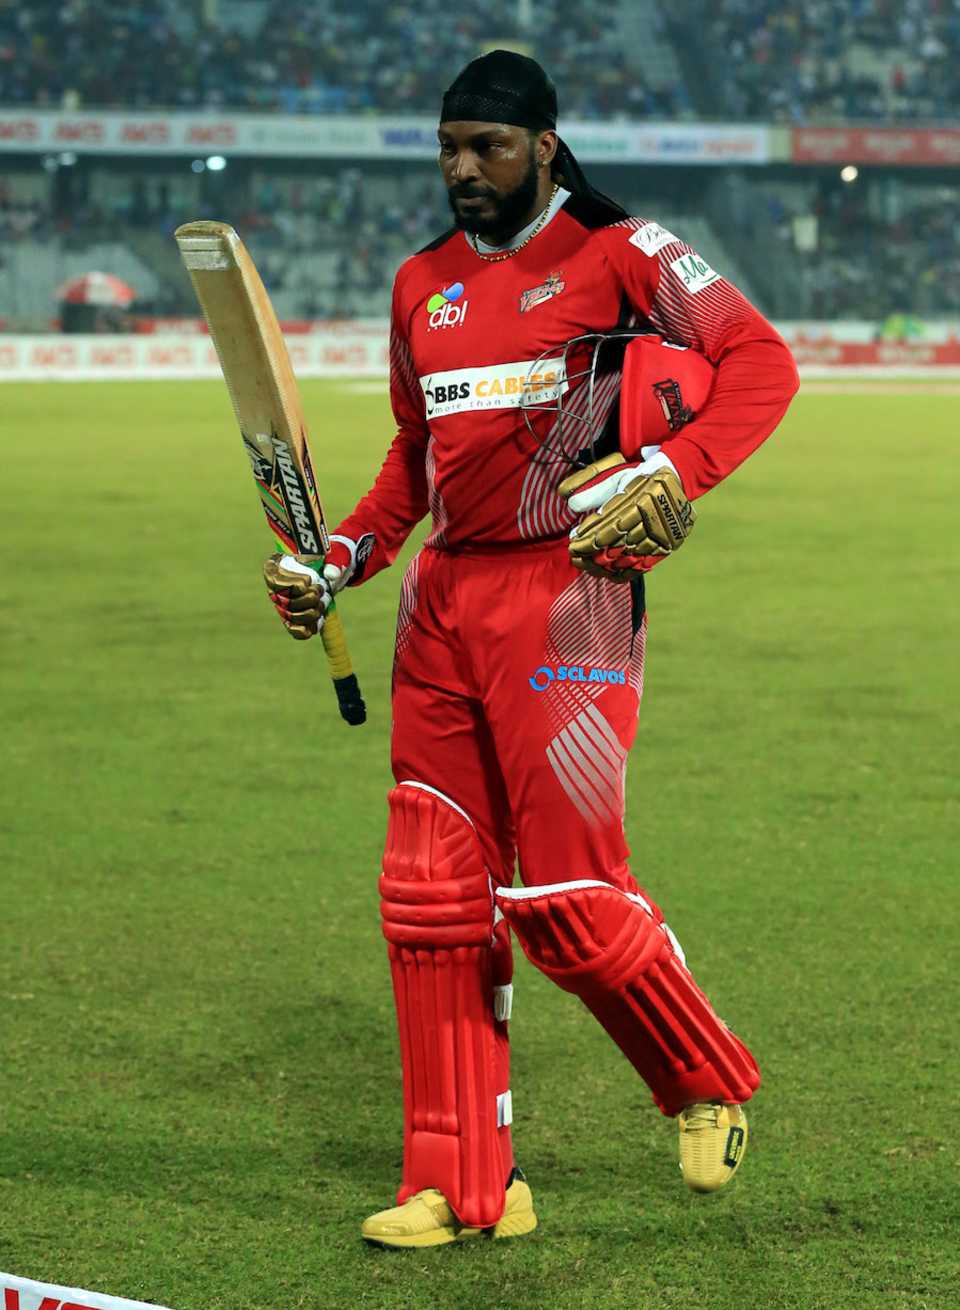 Chris Gayle walks back after clubbing four sixes